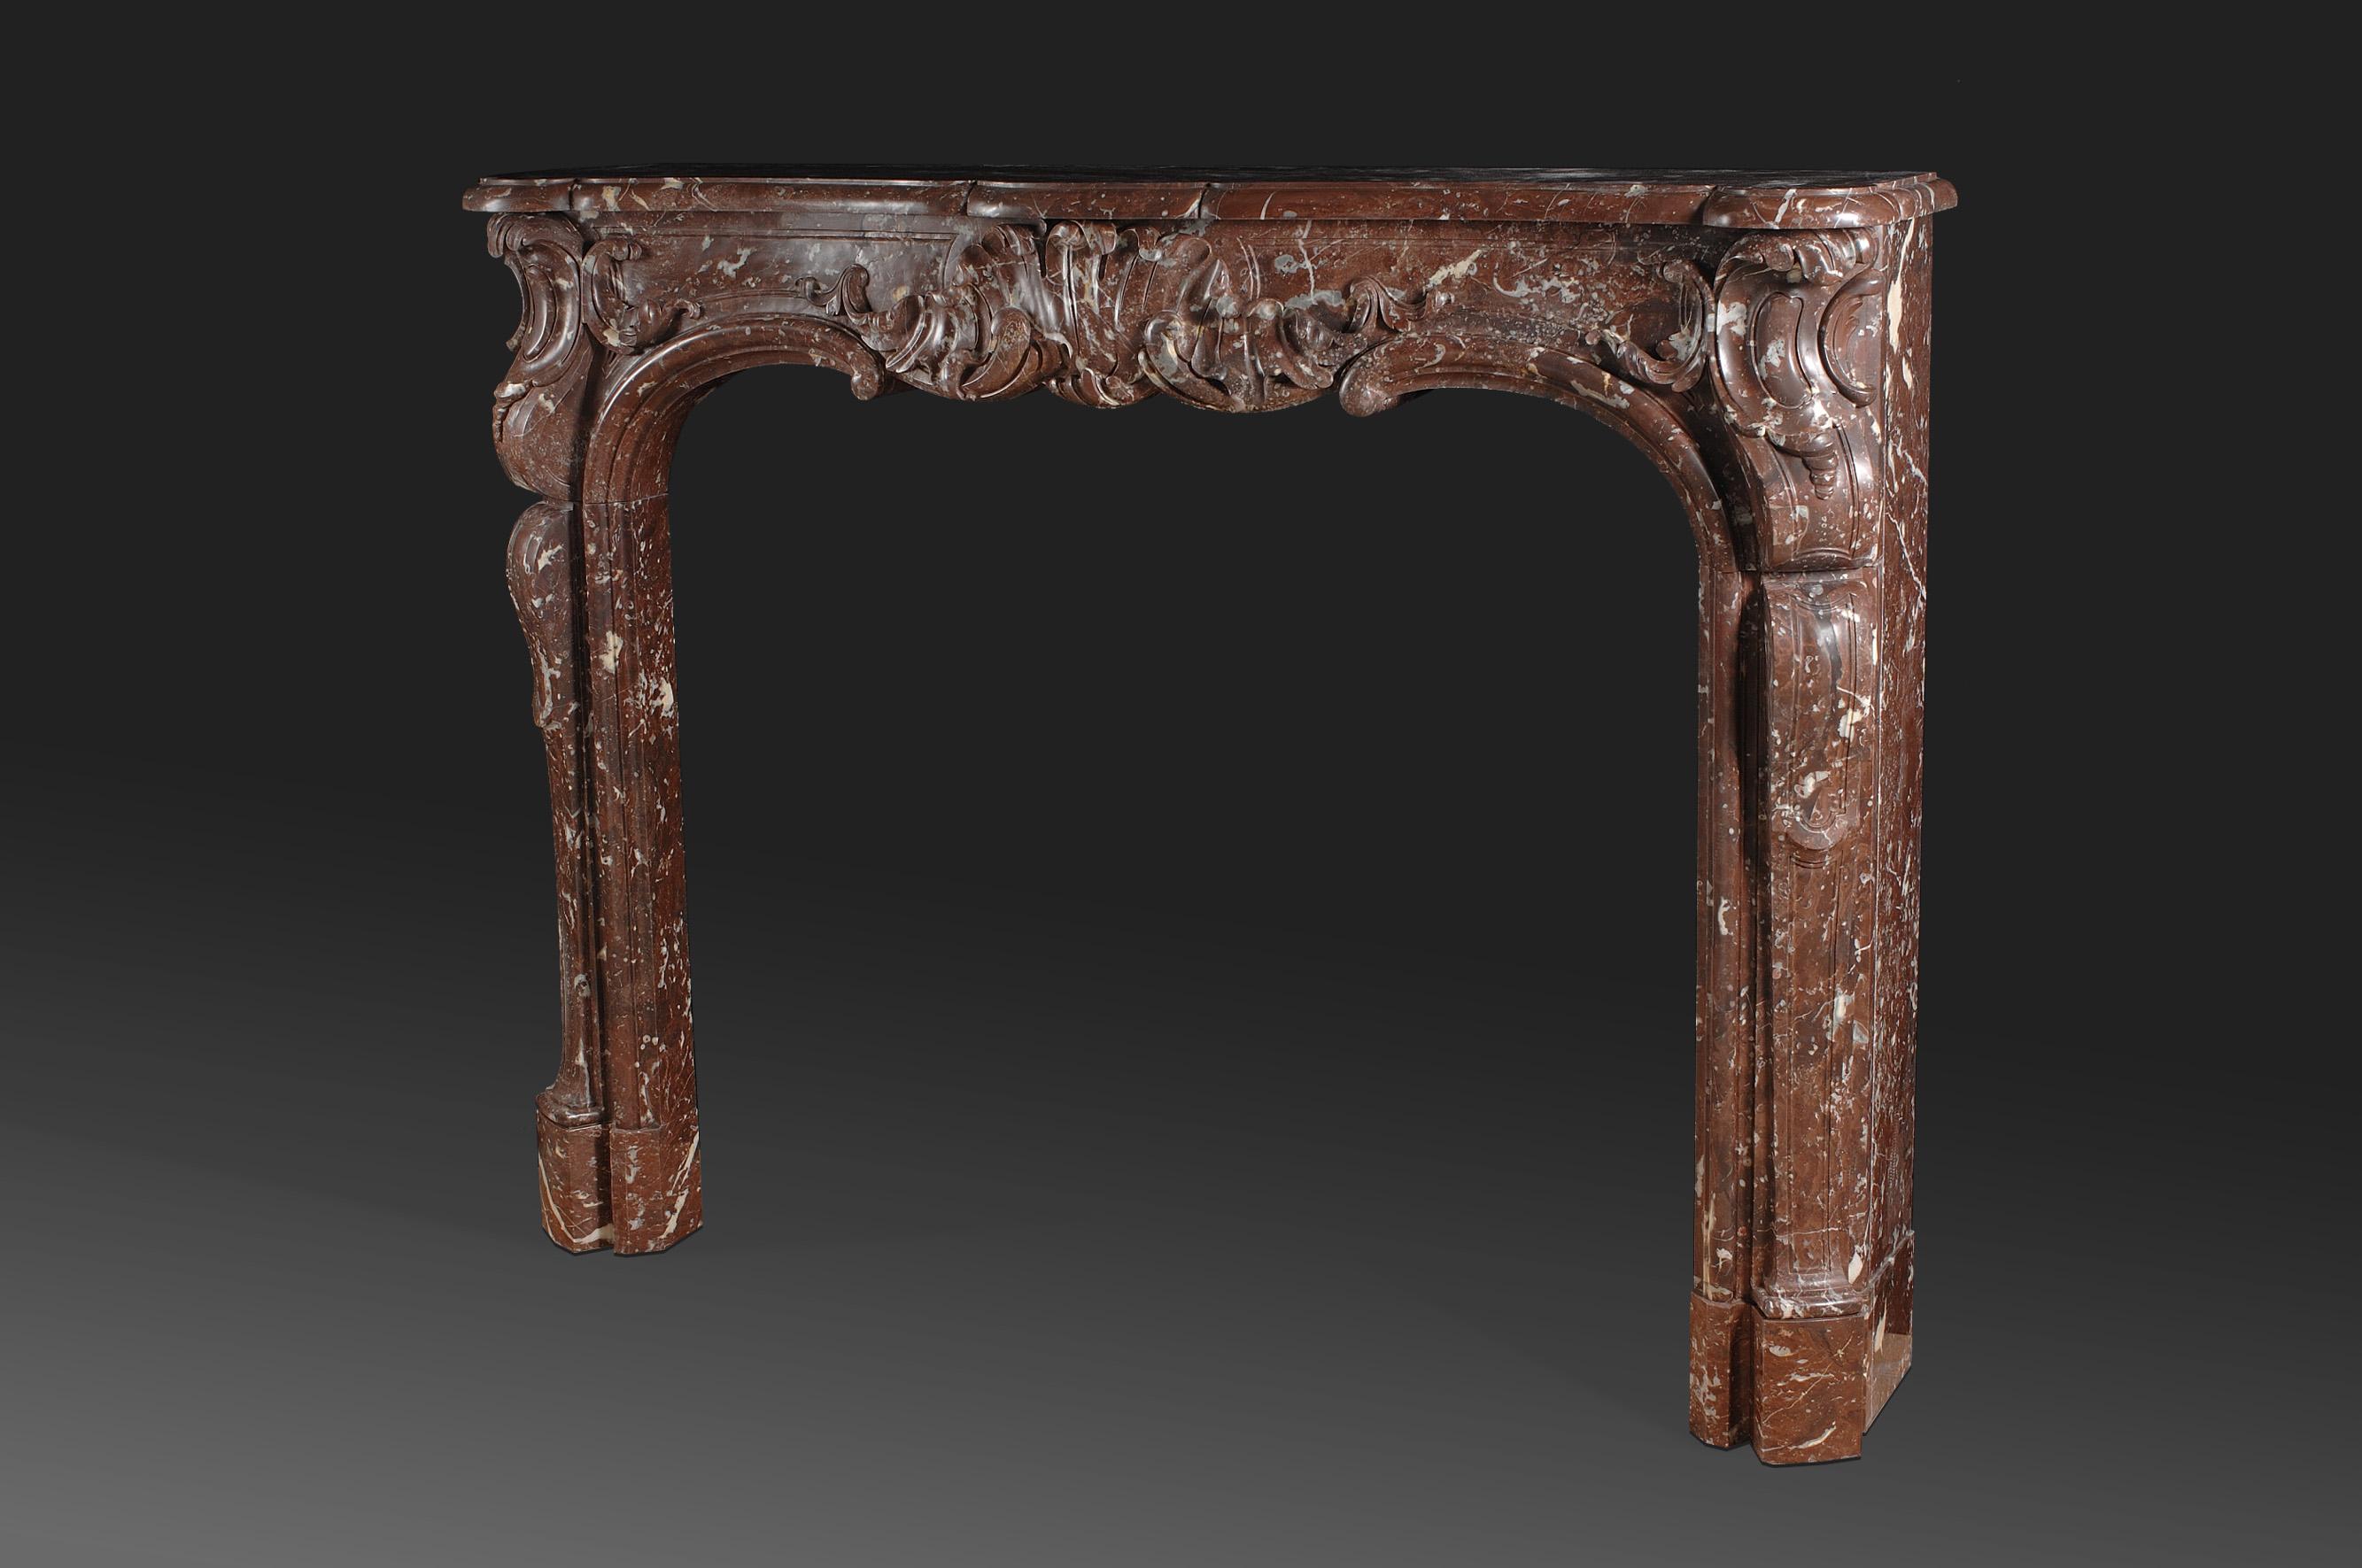 Reproduction of a 18th century Louis XV magnificent fireplace. The wide serpentine shelf sits on the shaped frieze which is centered by a very large shell cartouche, is flanked by scrolled endblocks descending on shaped and paneled jambs. Typical 18